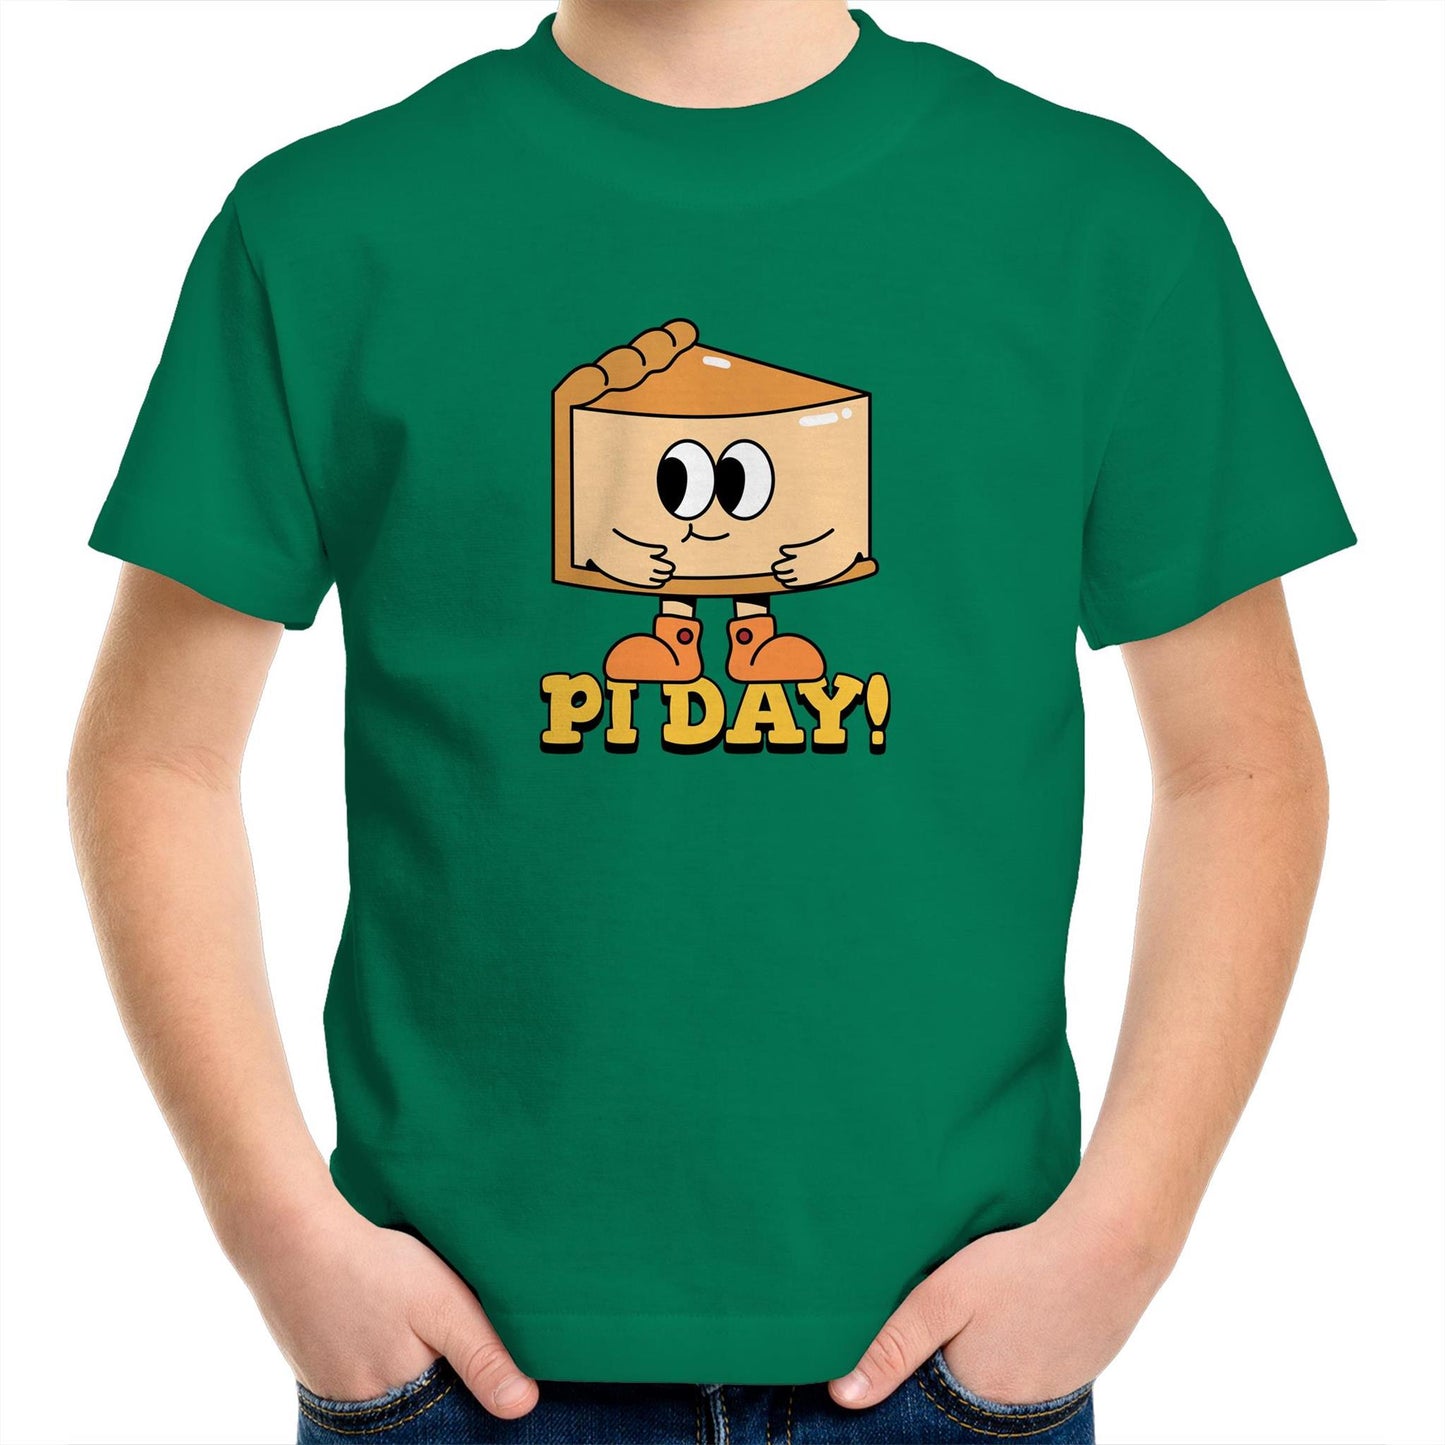 Pi Day - Kids Youth Crew T-Shirt Kelly Green Kids Youth T-shirt Maths Science